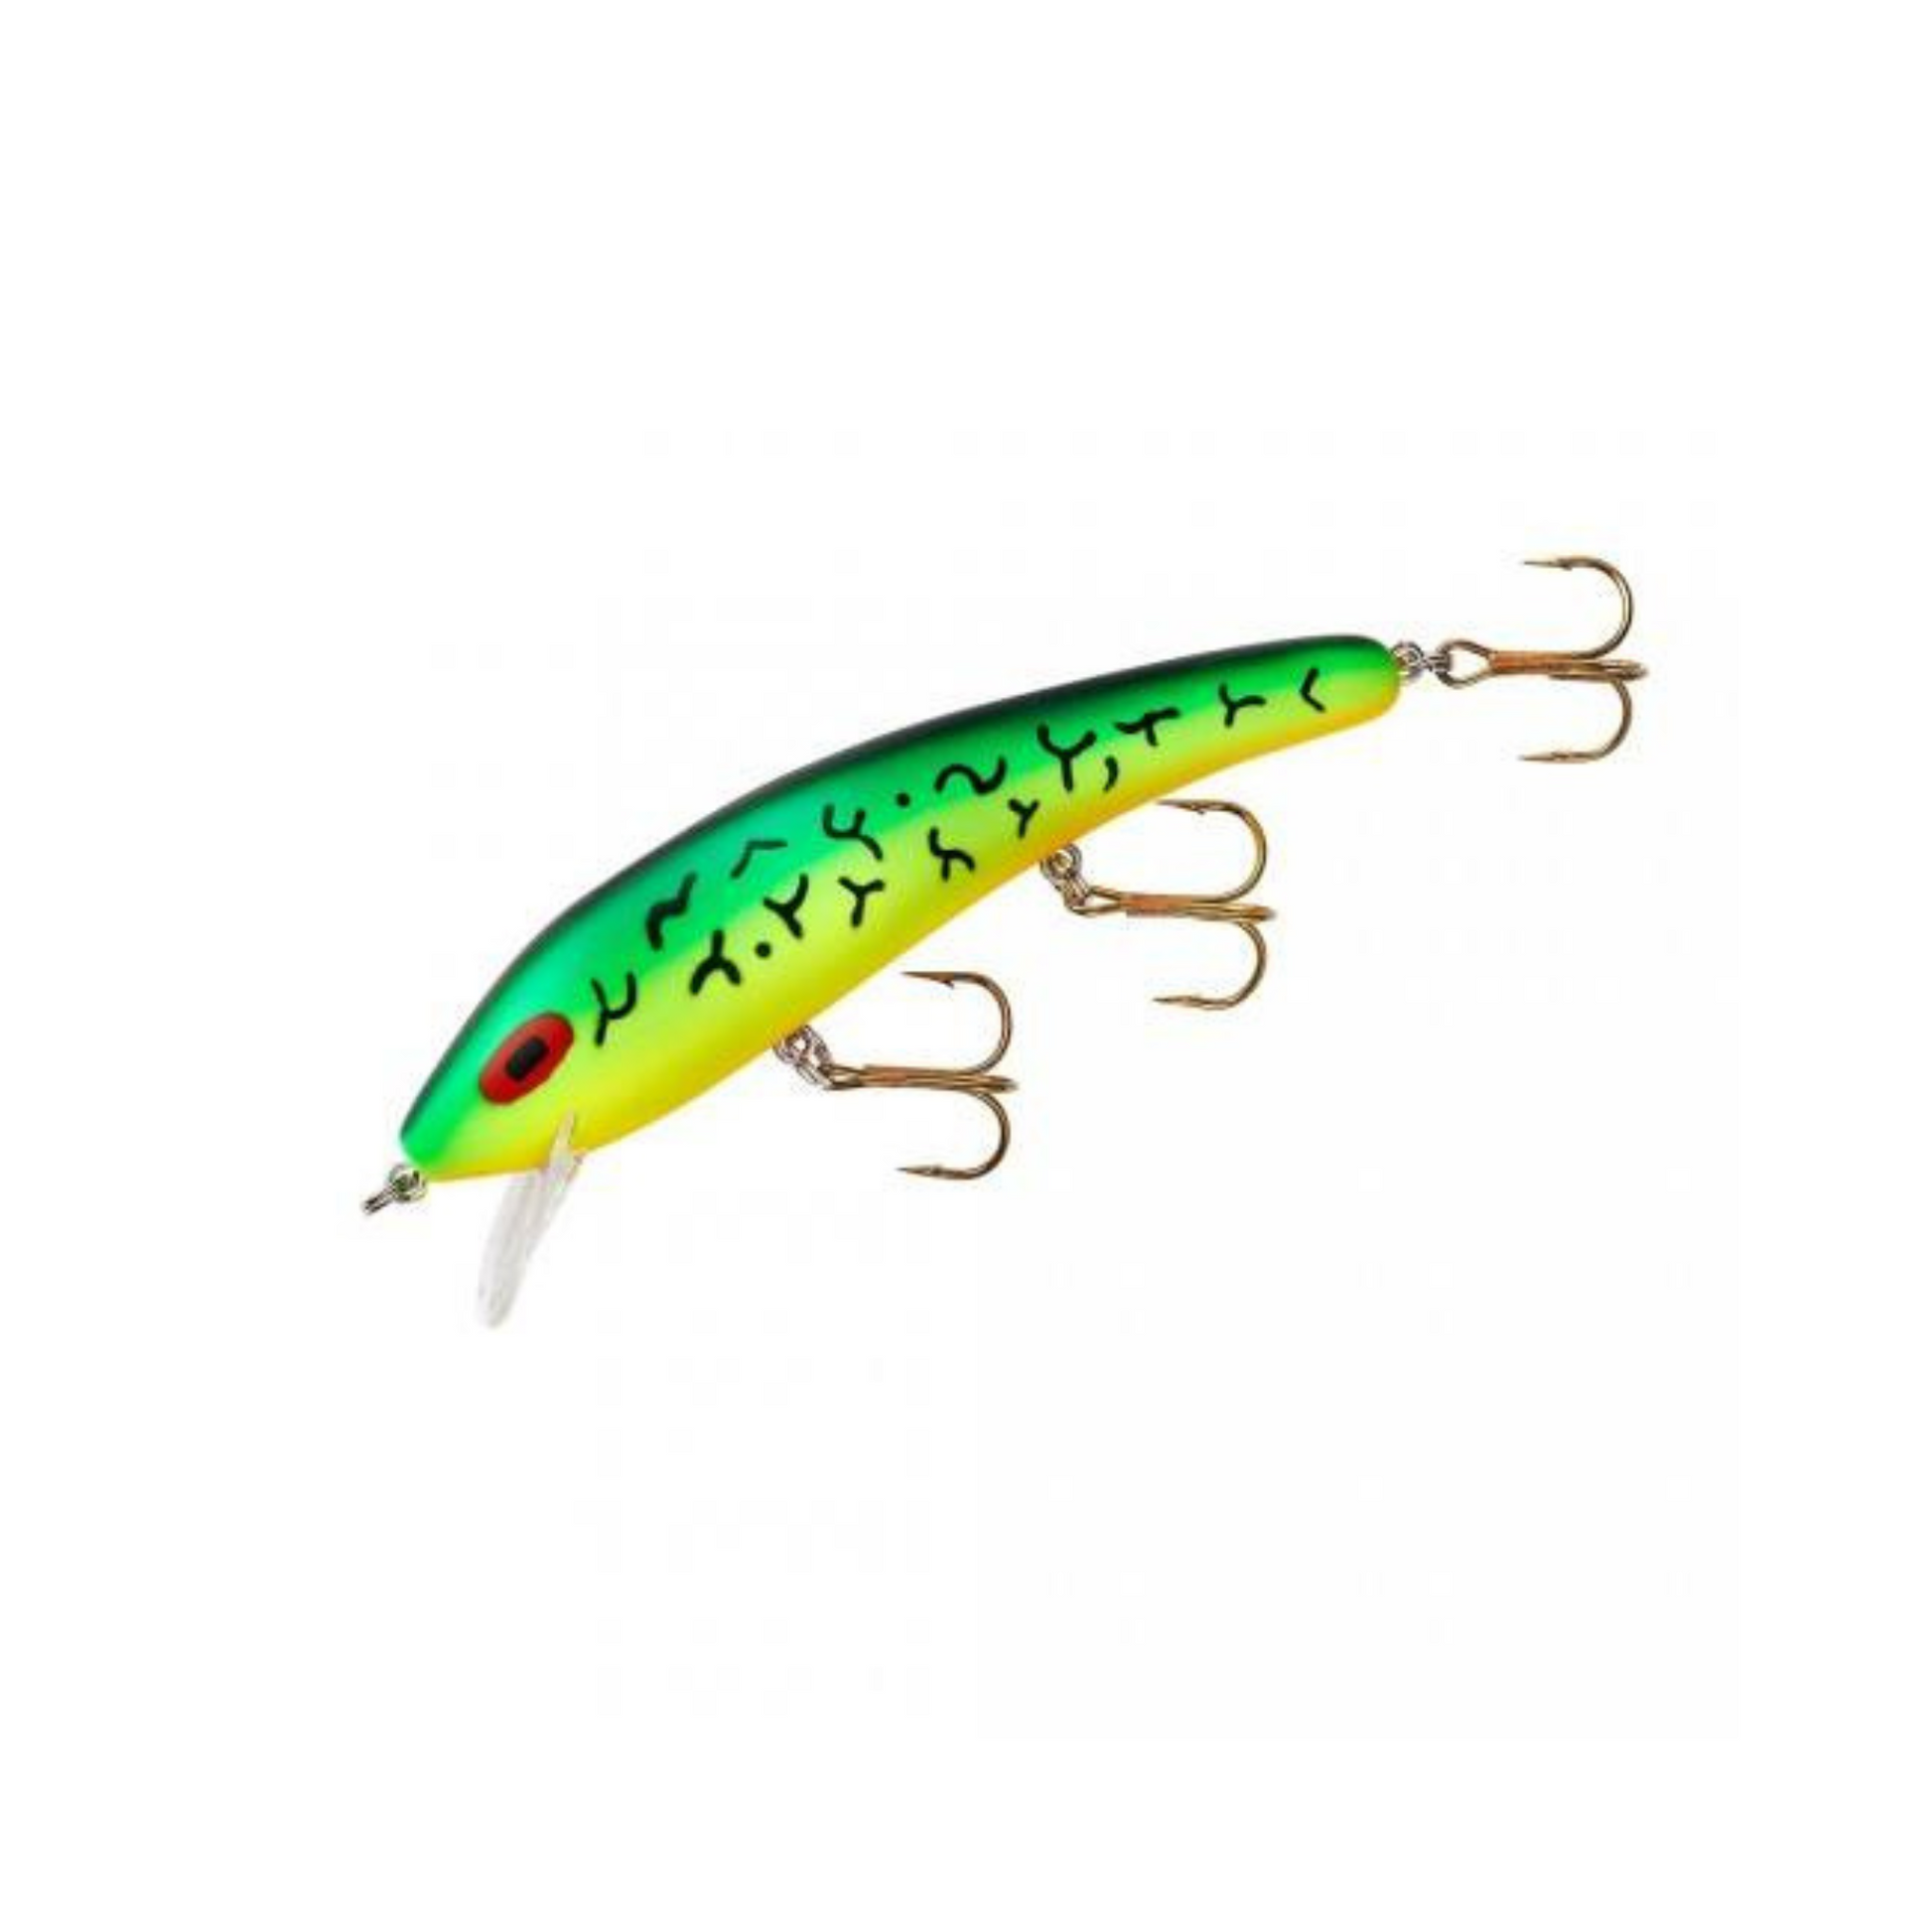 Cotton Cordell Suspending Ripplin Red Fin 3/8 Oz Fishing Lure : Target